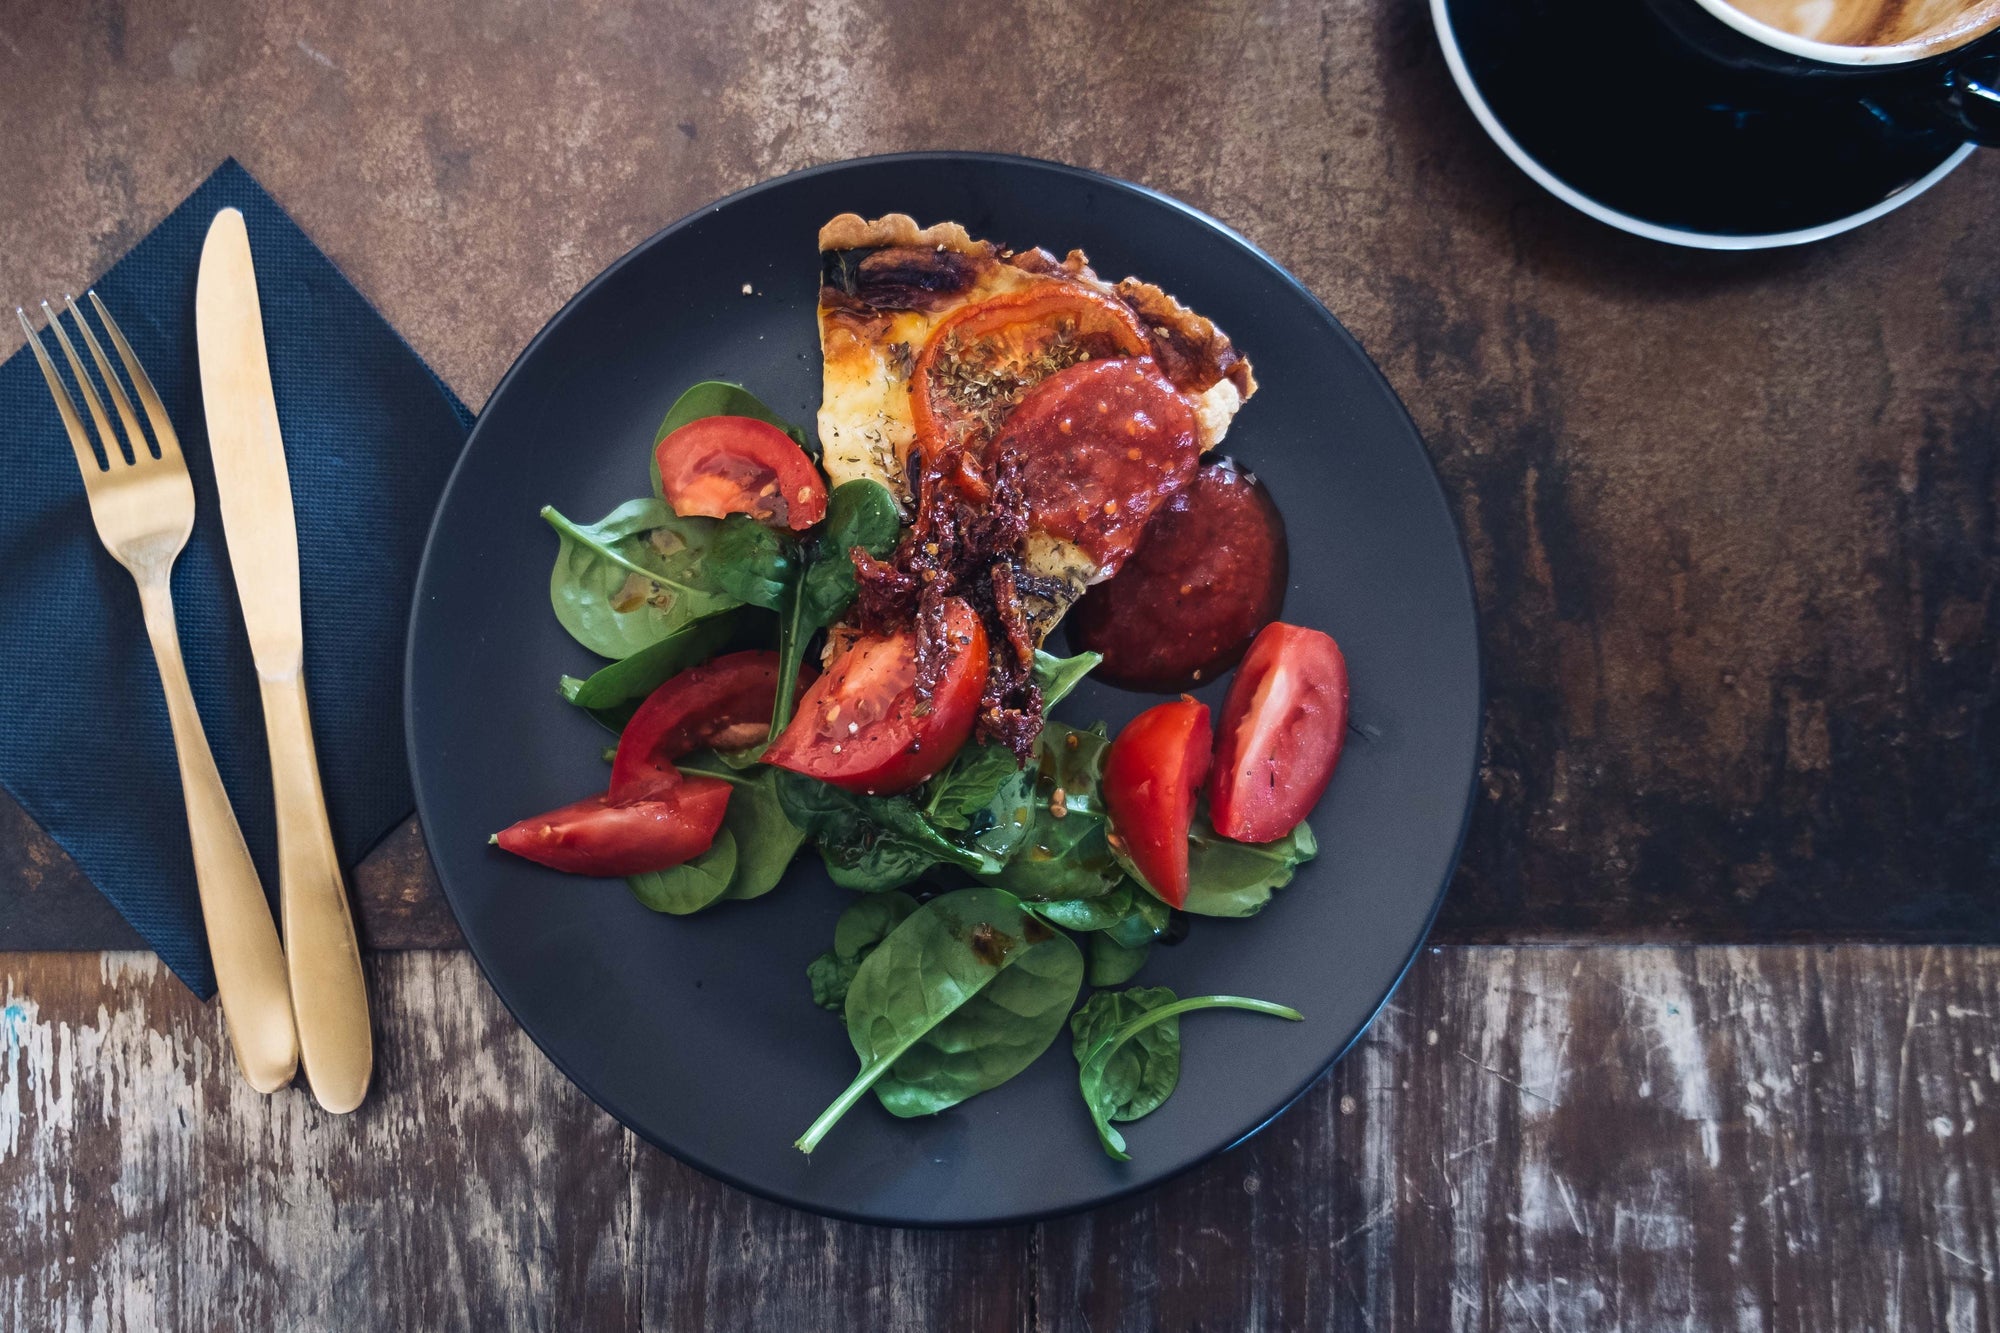 How to Meal Prep like a pro - with recipes! - FoodSt